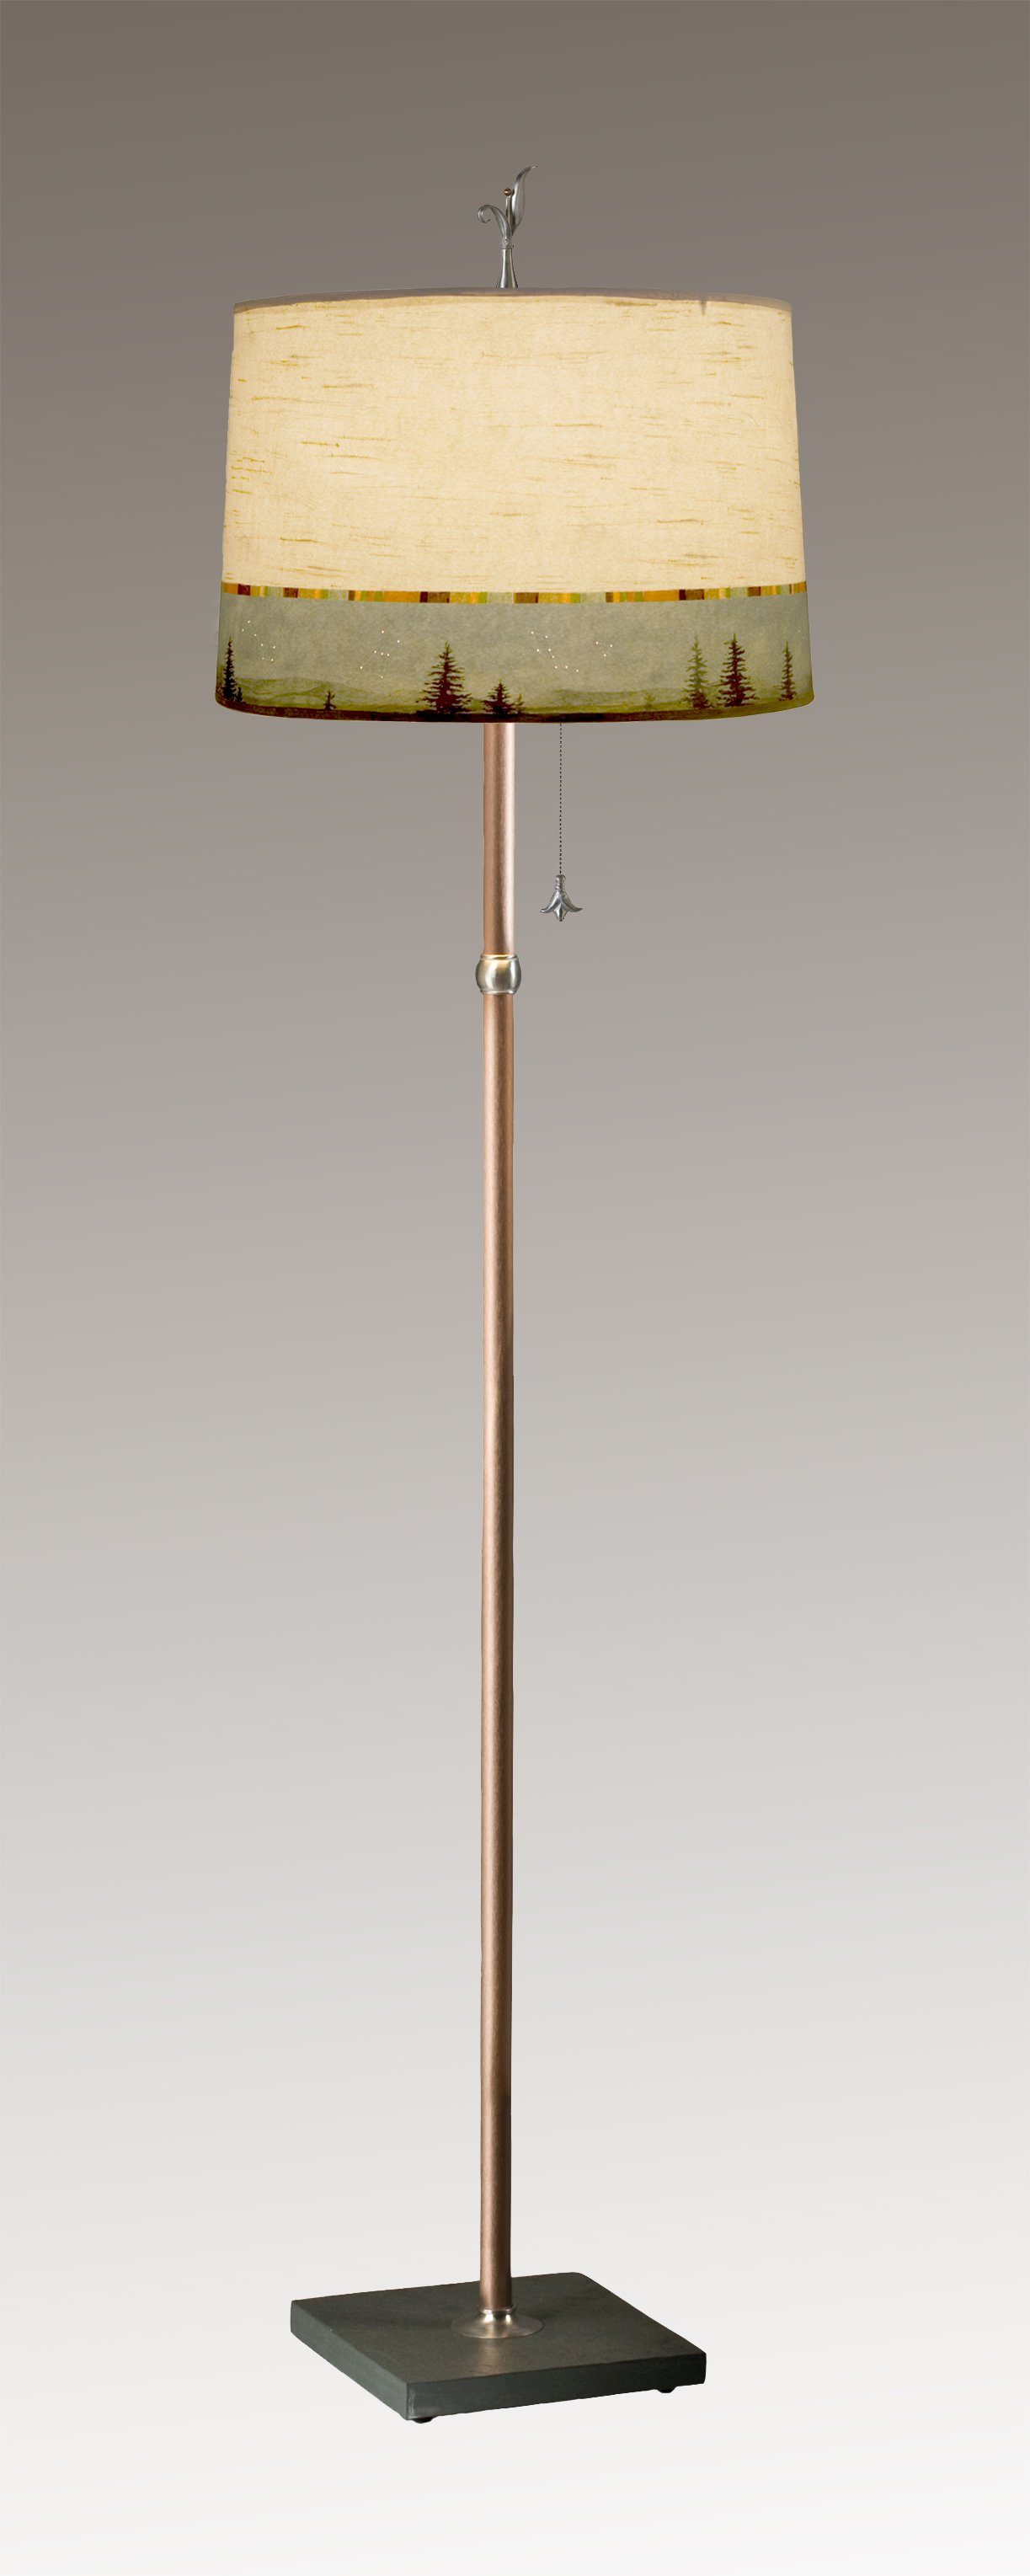 Janna Ugone & Co Floor Lamps Copper Floor Lamp with Large Drum Shade in Birch Midnight